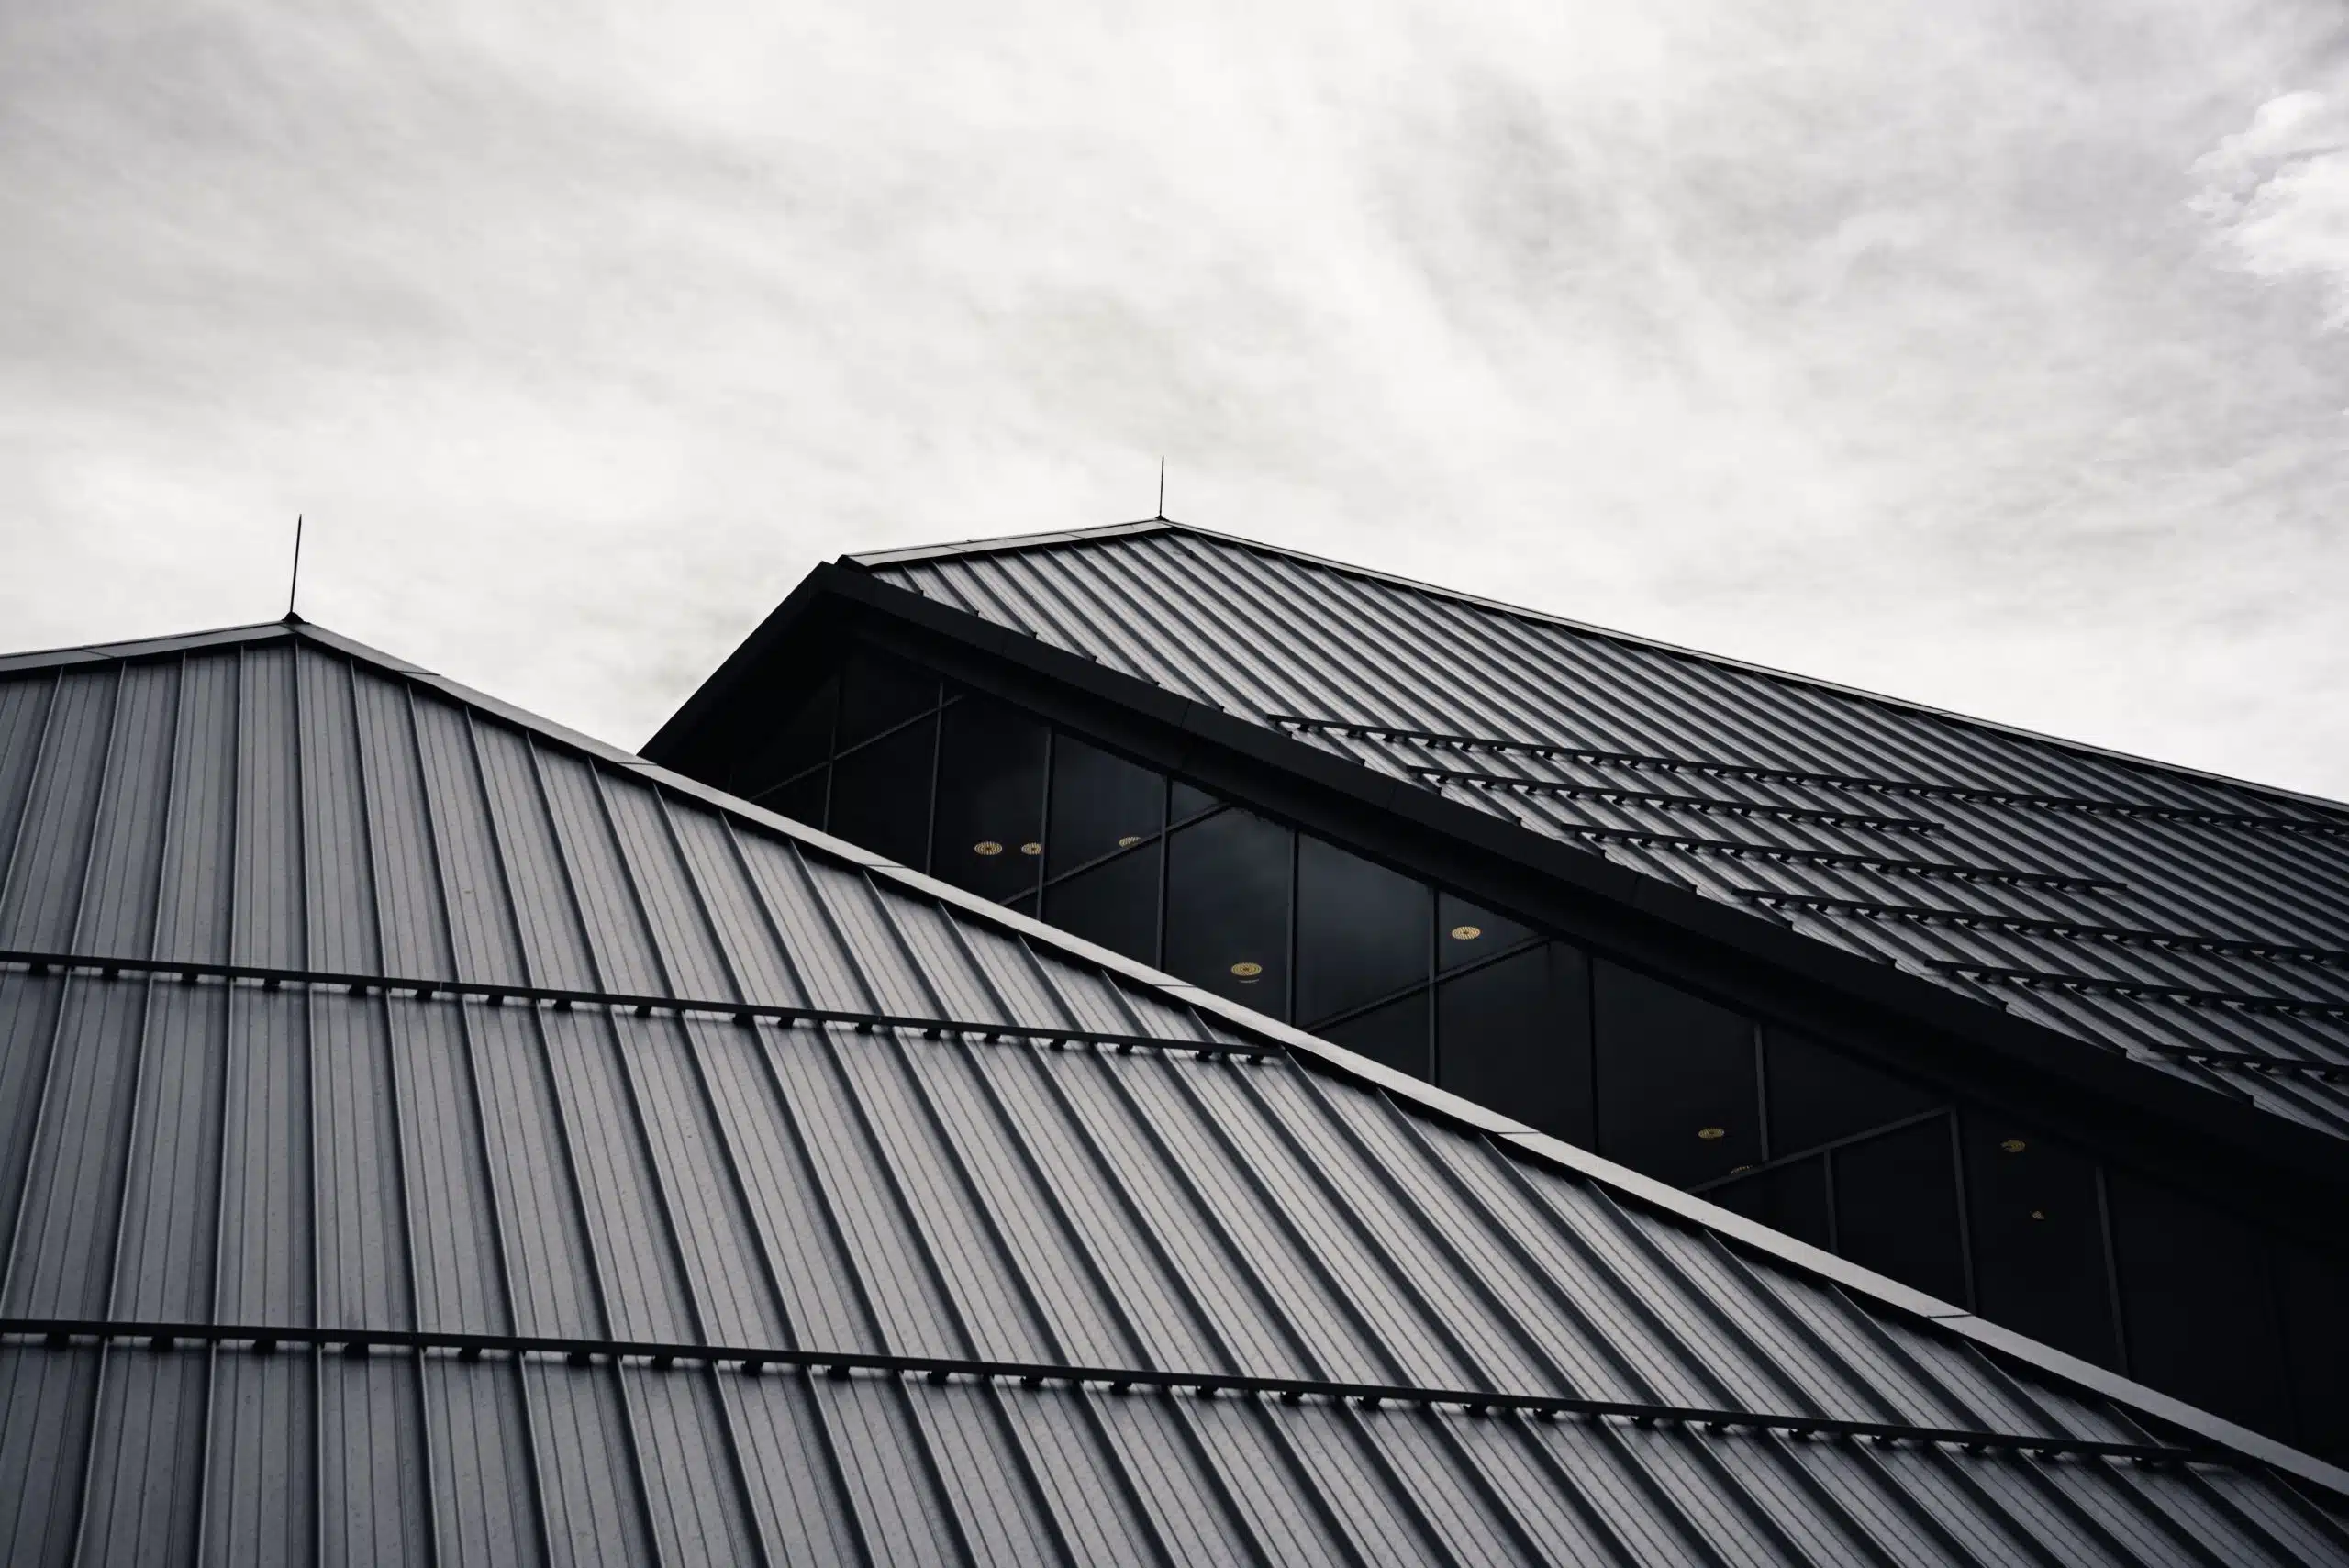 Types of a metal roof